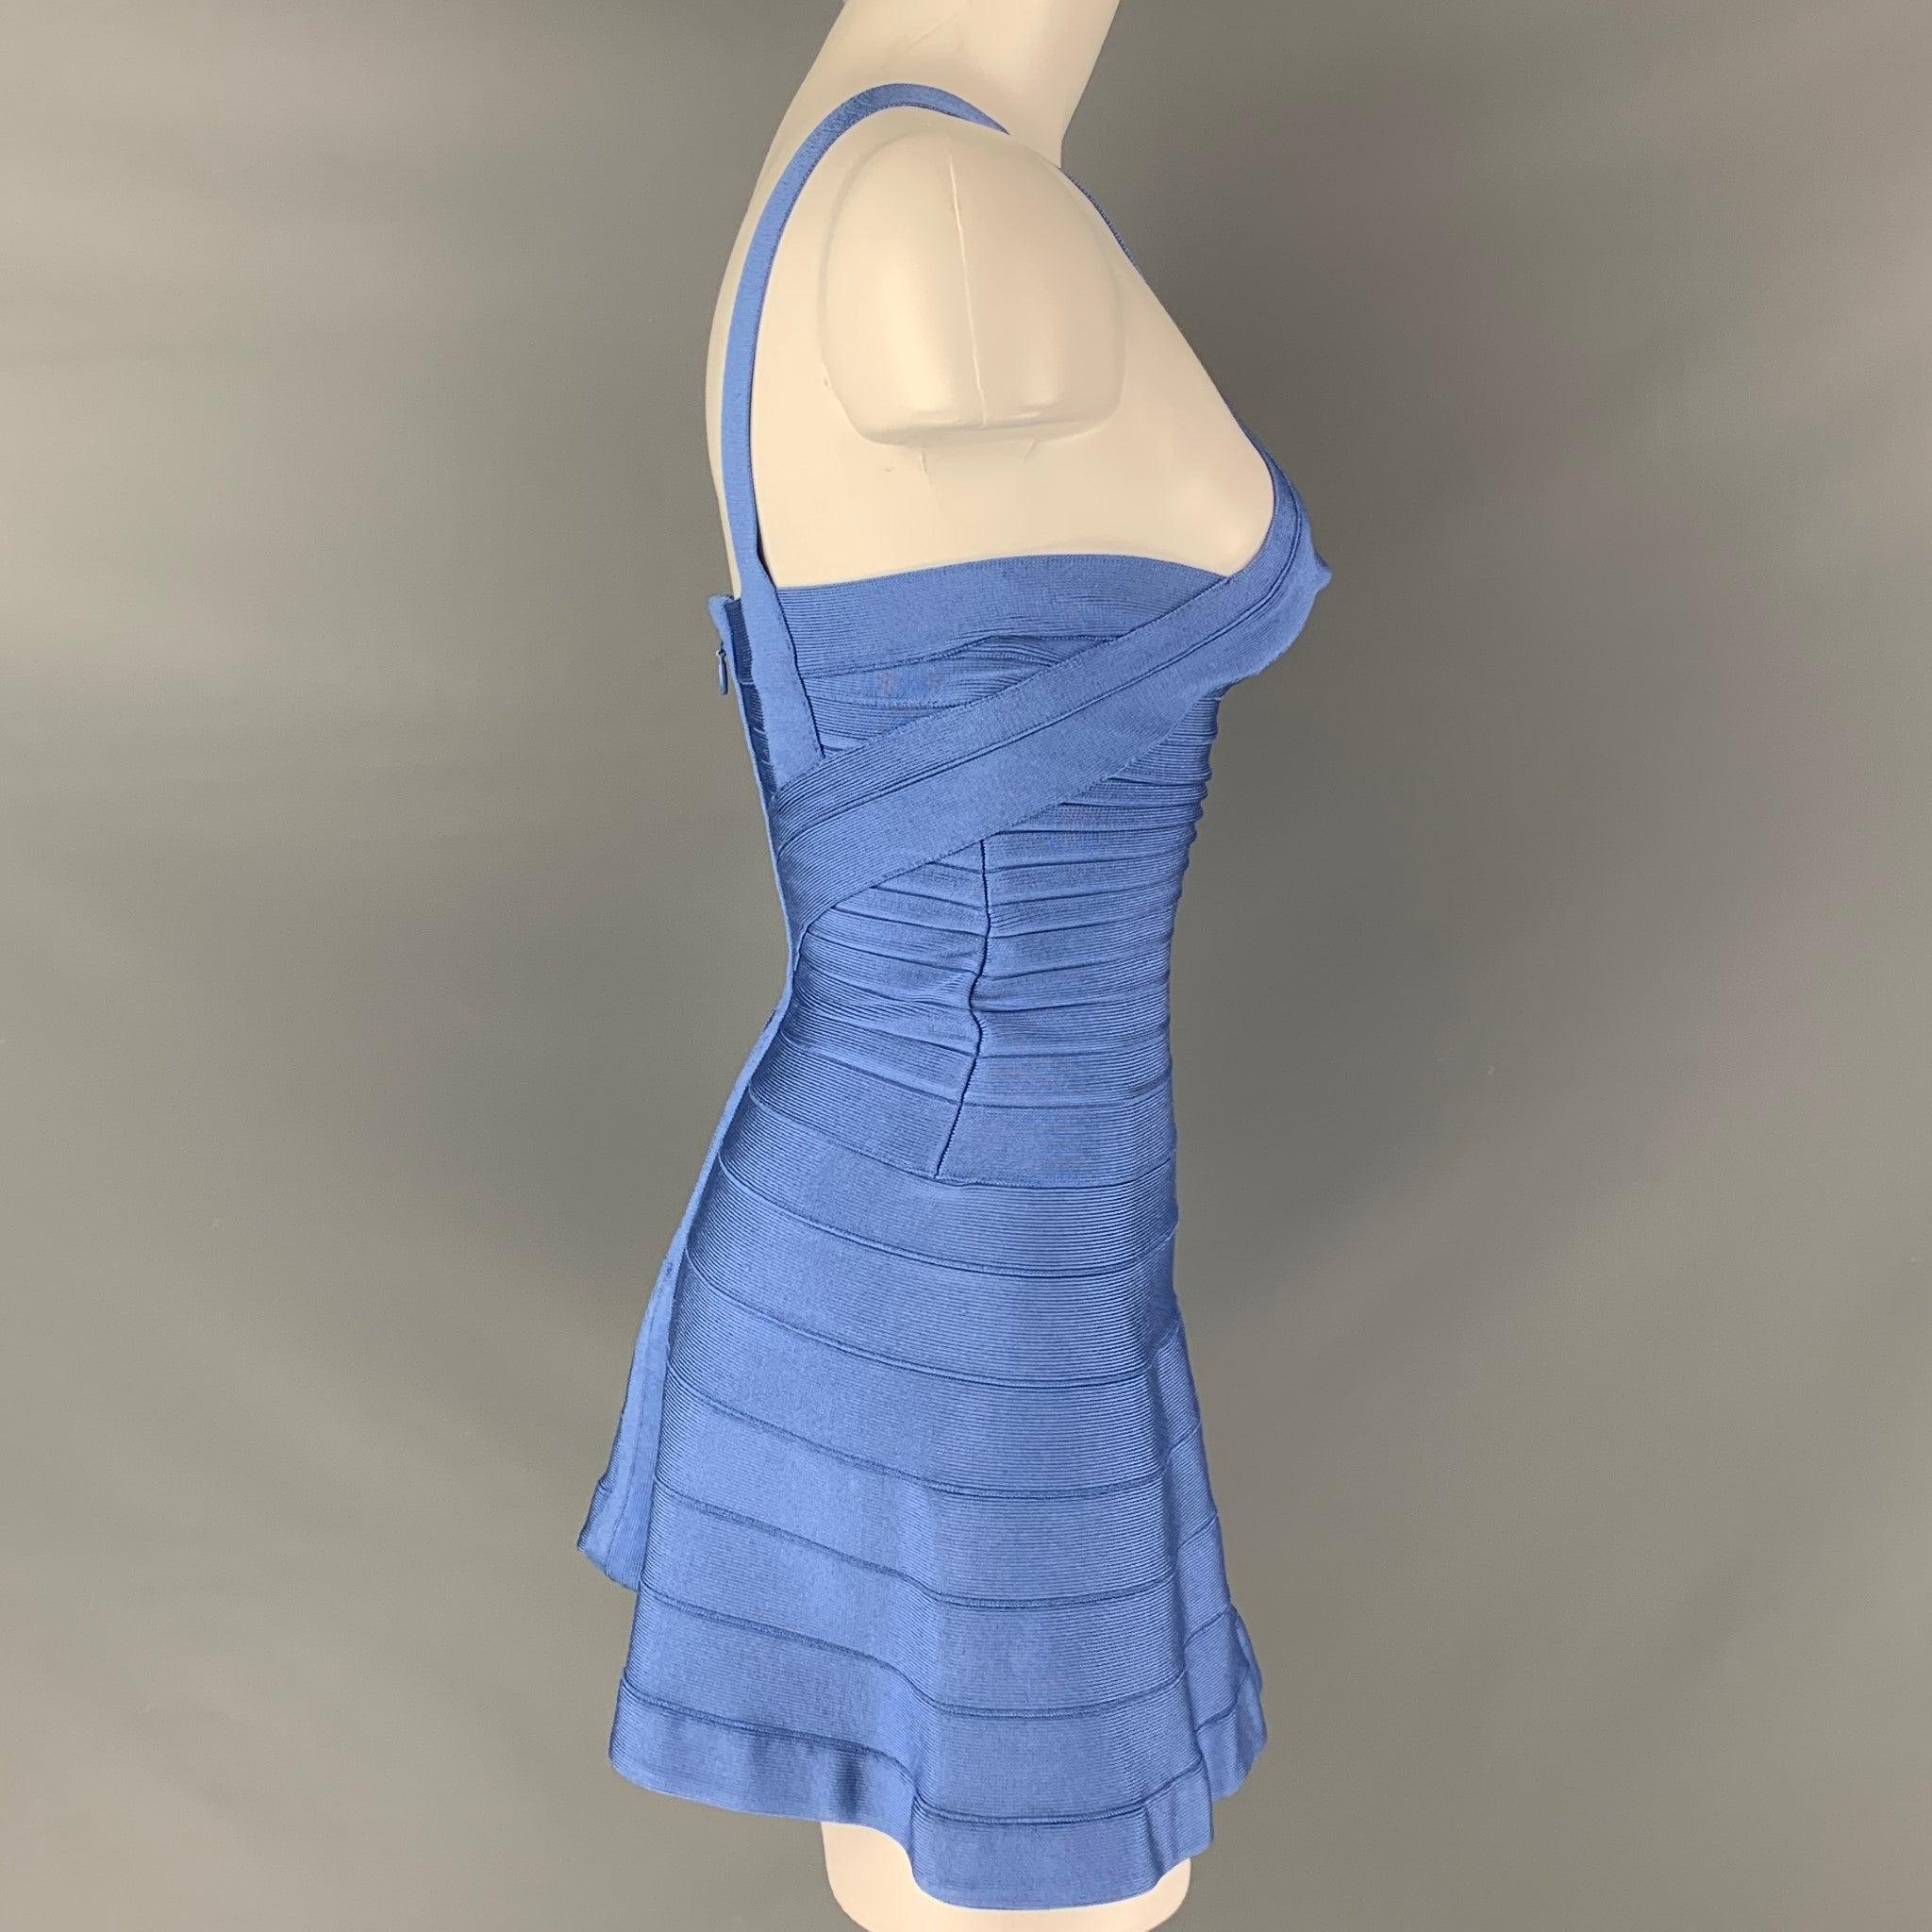 HERVE LEGER cocktail mini dress comes in blue rayon blend knit fabric featuring a strappy neckline, A-line shape, and a back zipper closure.Good Pre-Owned Condition.
 As Is. Garment Altered. 
 

 Marked:  XXS 
 

 Measurements: 
  Bust: 28 inches